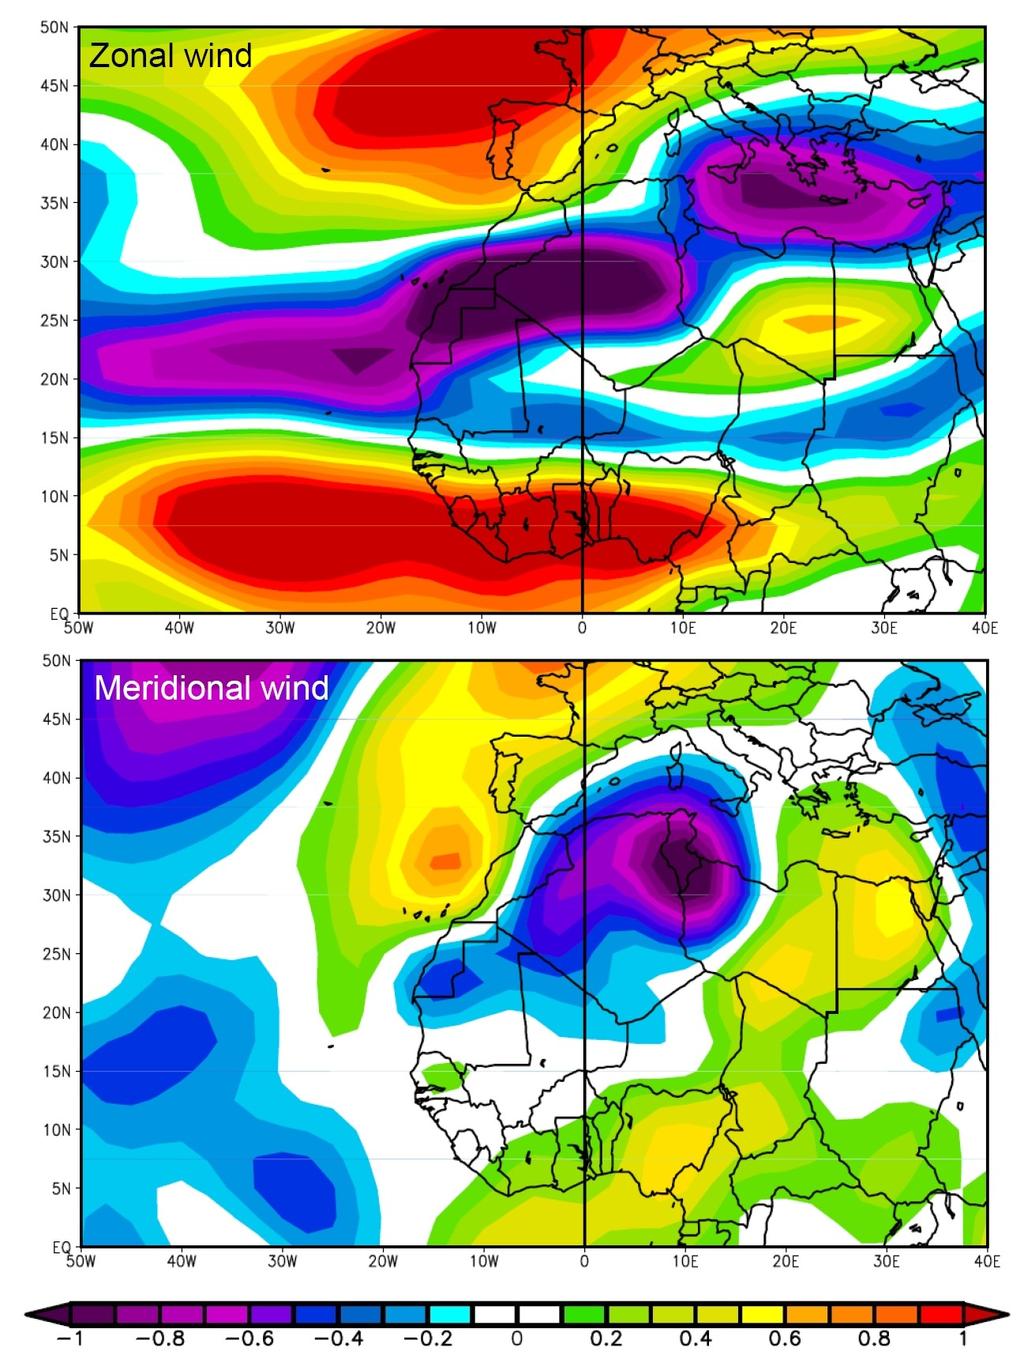 S. Regression plots between NAFDI and 00 hpa zonal (for the Atlantic) and meridional (for the Mediterranean) wind components for the period 190-01. Figure S.